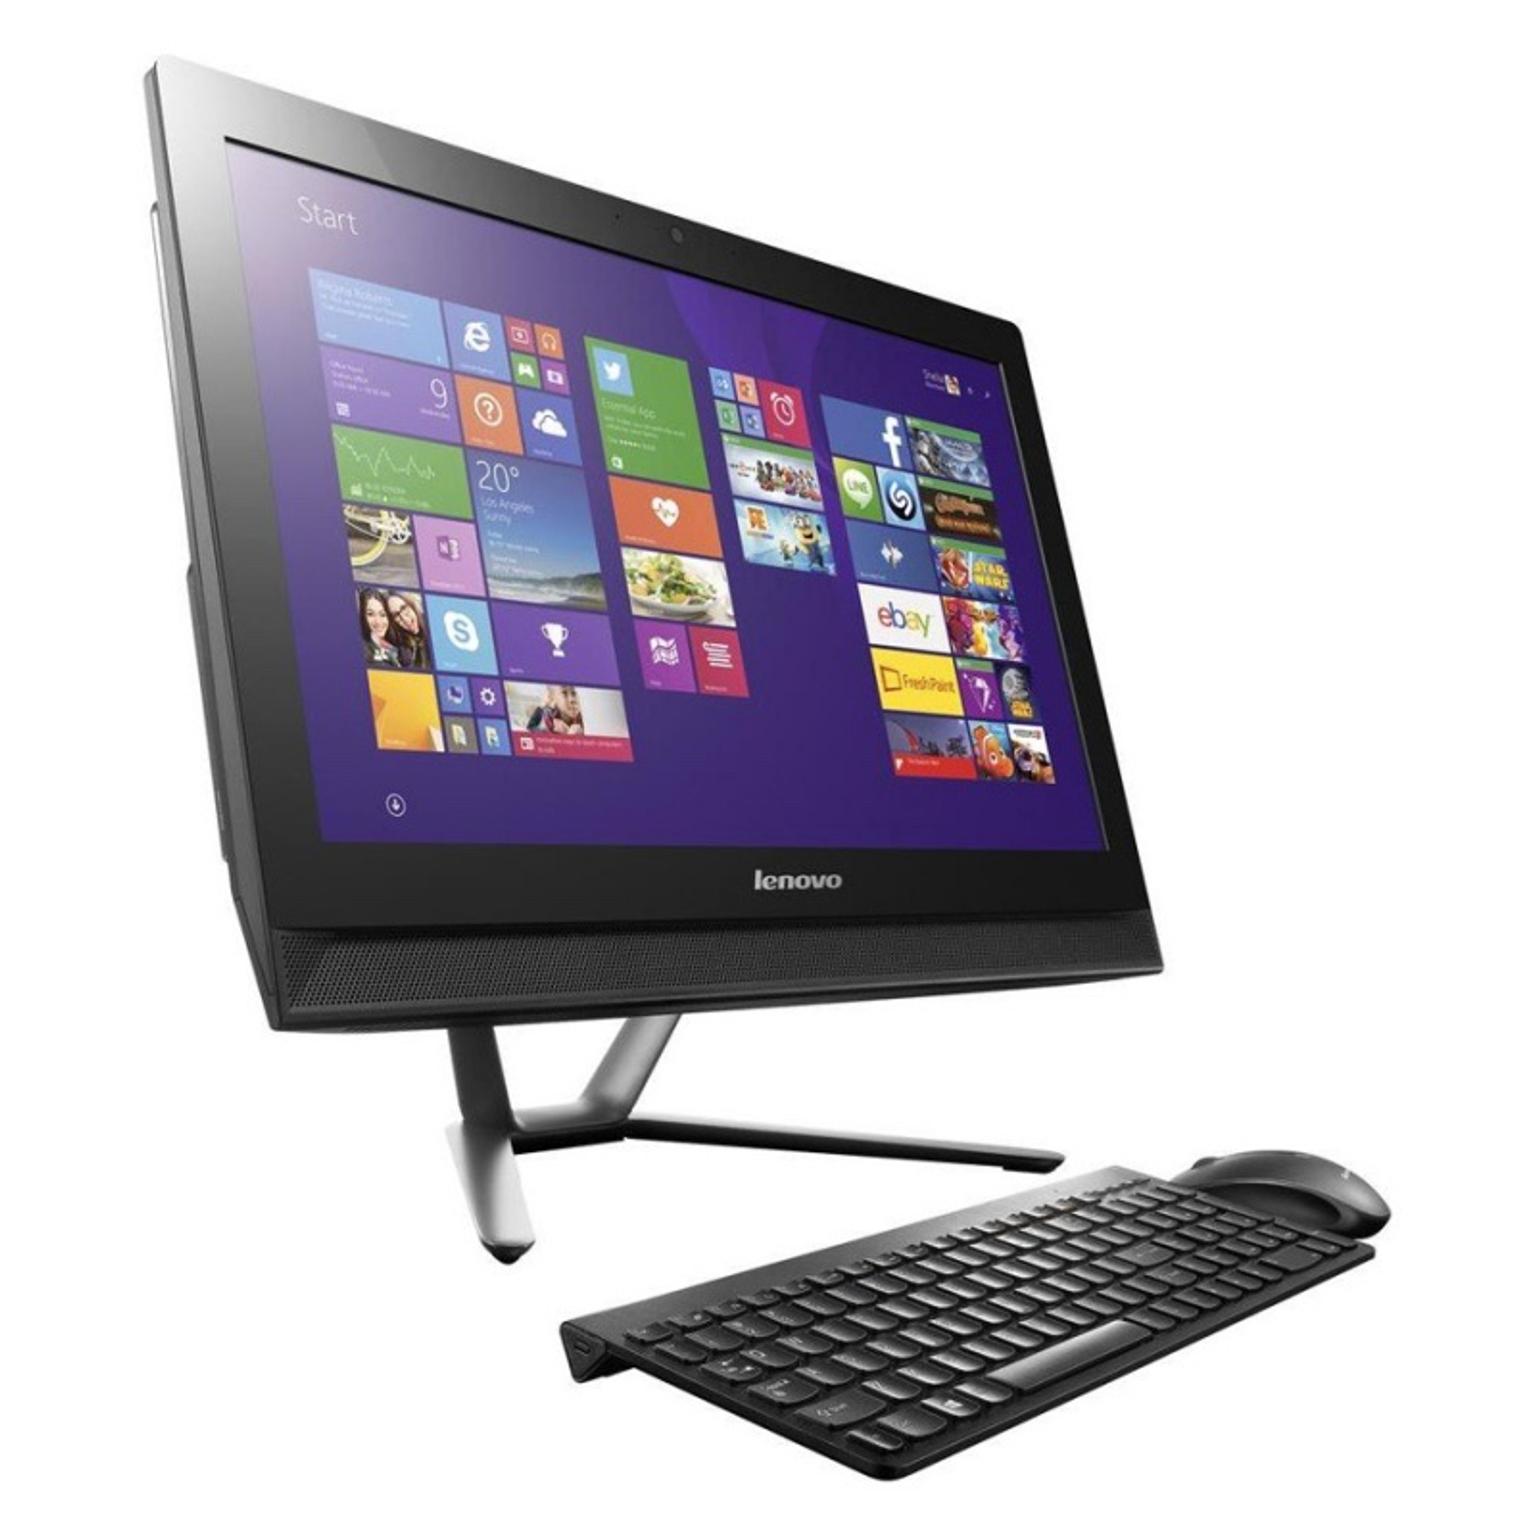 Lenovo All In One Desktop Pc Touchscreen In Ng13 Rushcliffe Fur